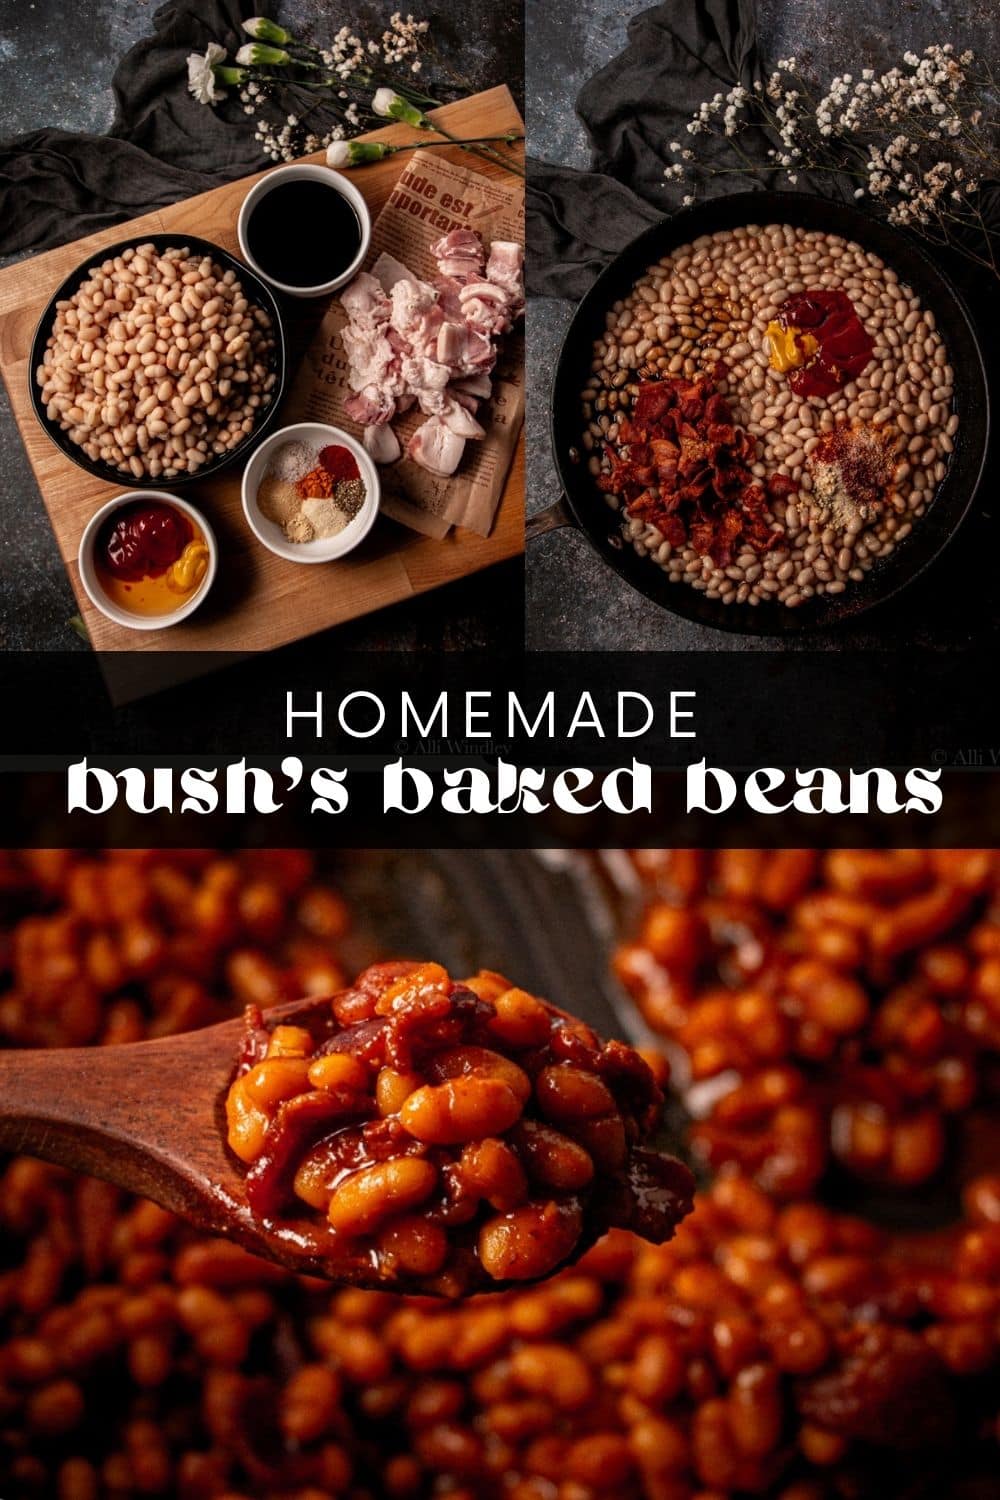 This copycat Bush's baked beans recipe uses simple ingredients and pantry staples! It's got that signature sweet and tangy flavor, just like the original. You'd never guess it's made completely from scratch!